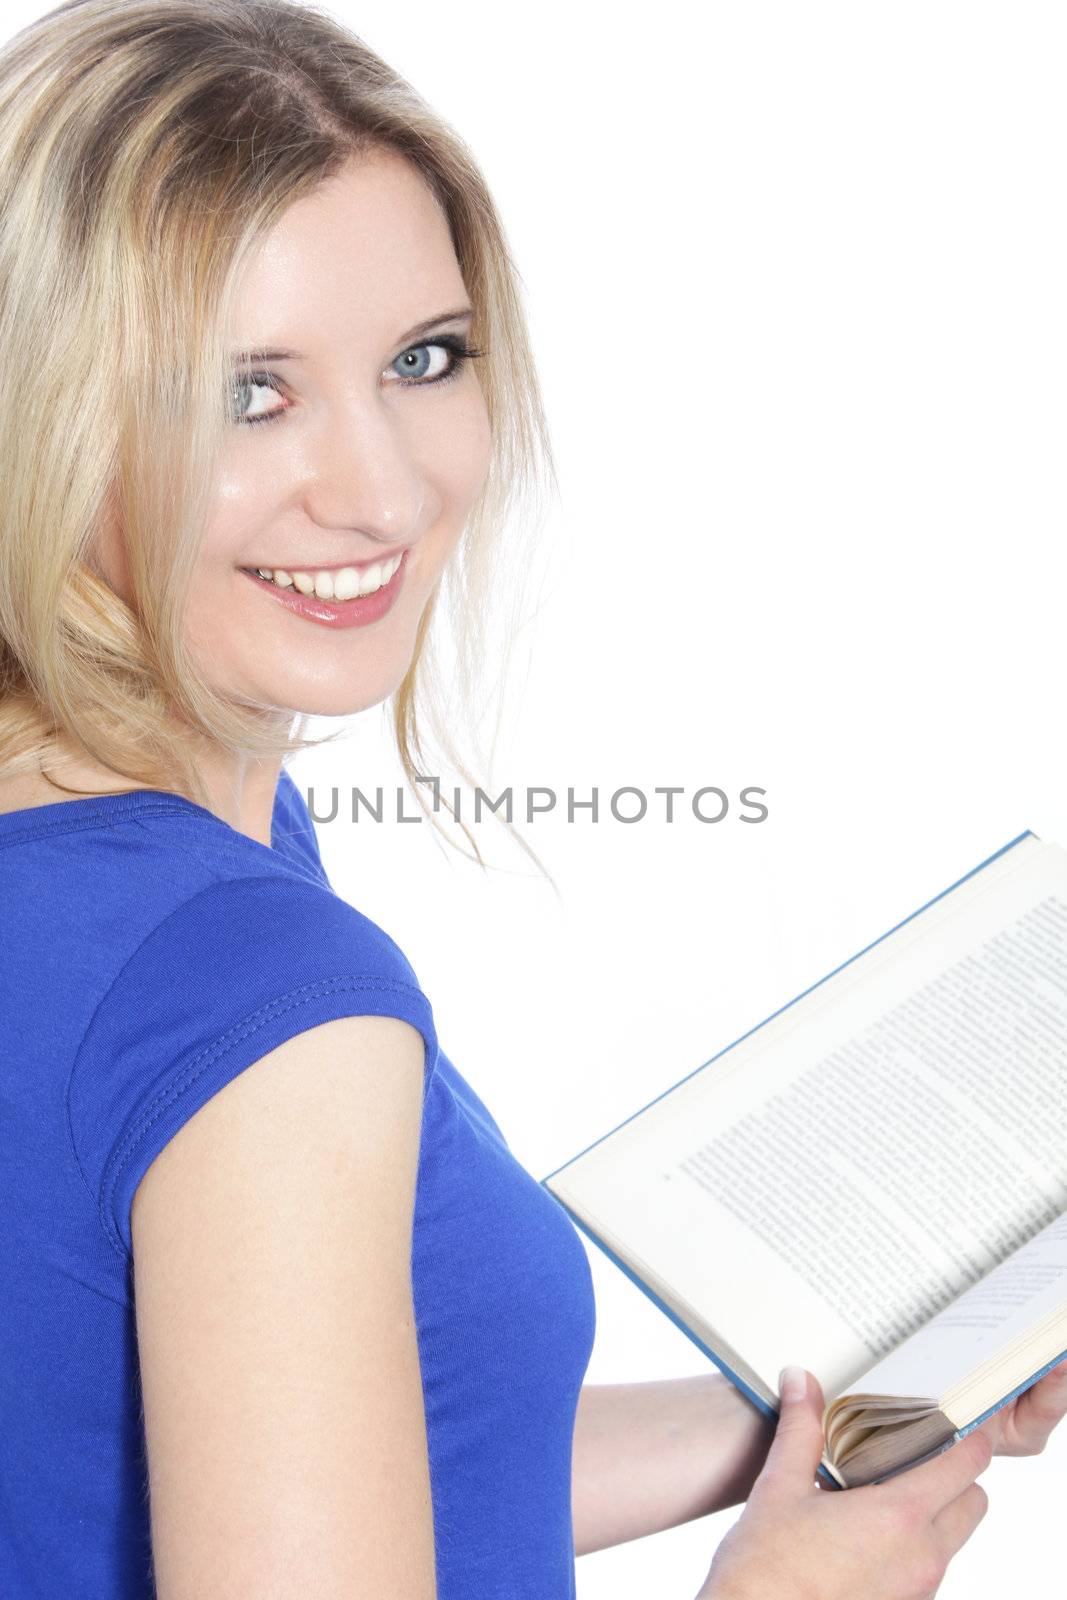 Cheerful woman reading a book by Farina6000